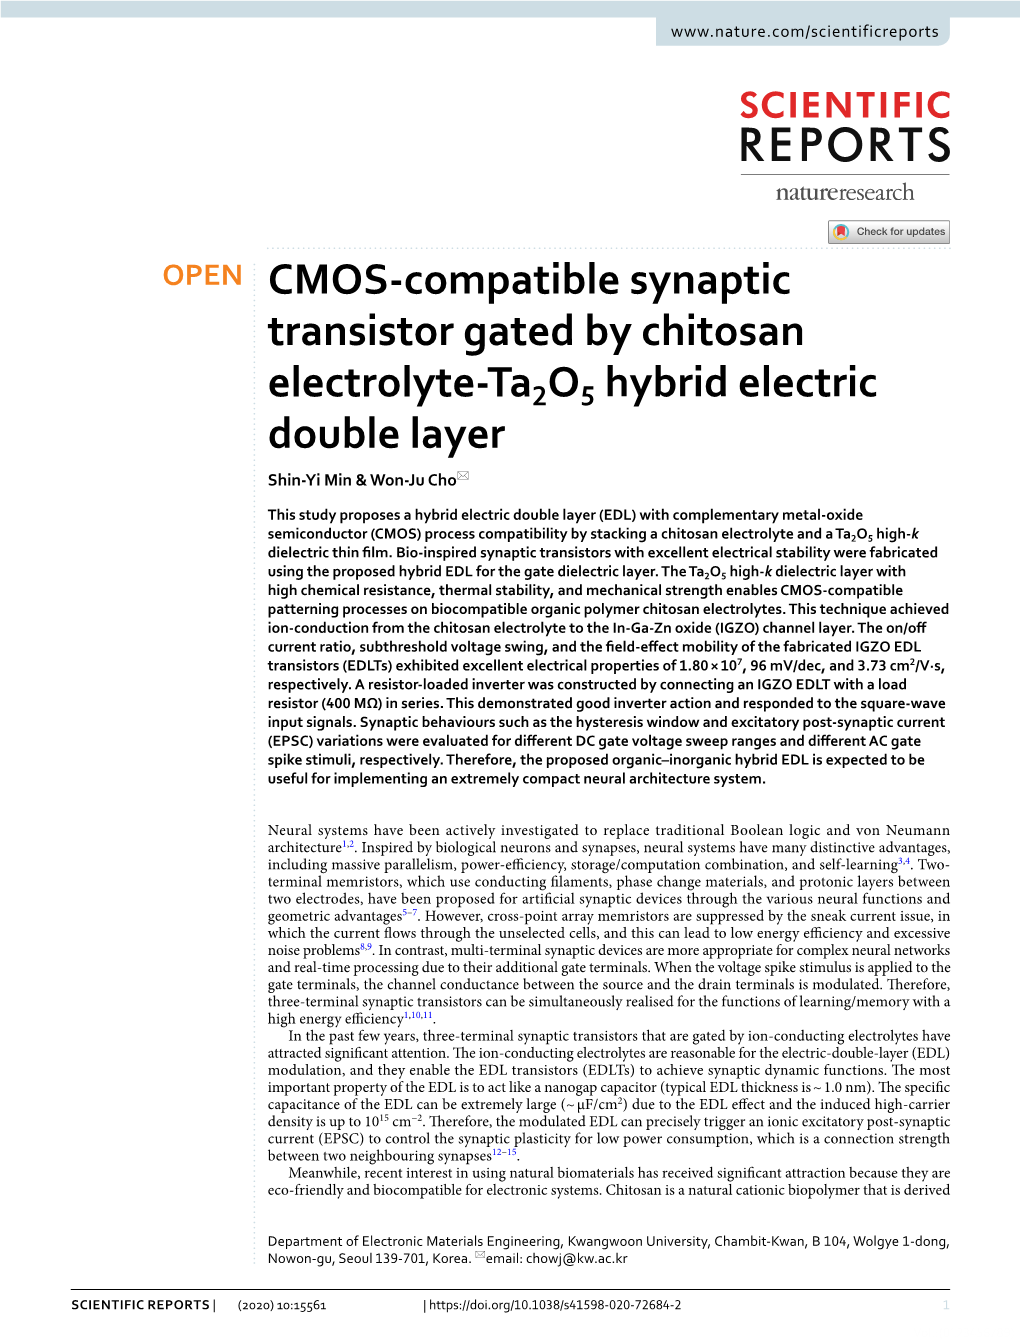 CMOS-Compatible Synaptic Transistor Gated by Chitosan Electrolyte